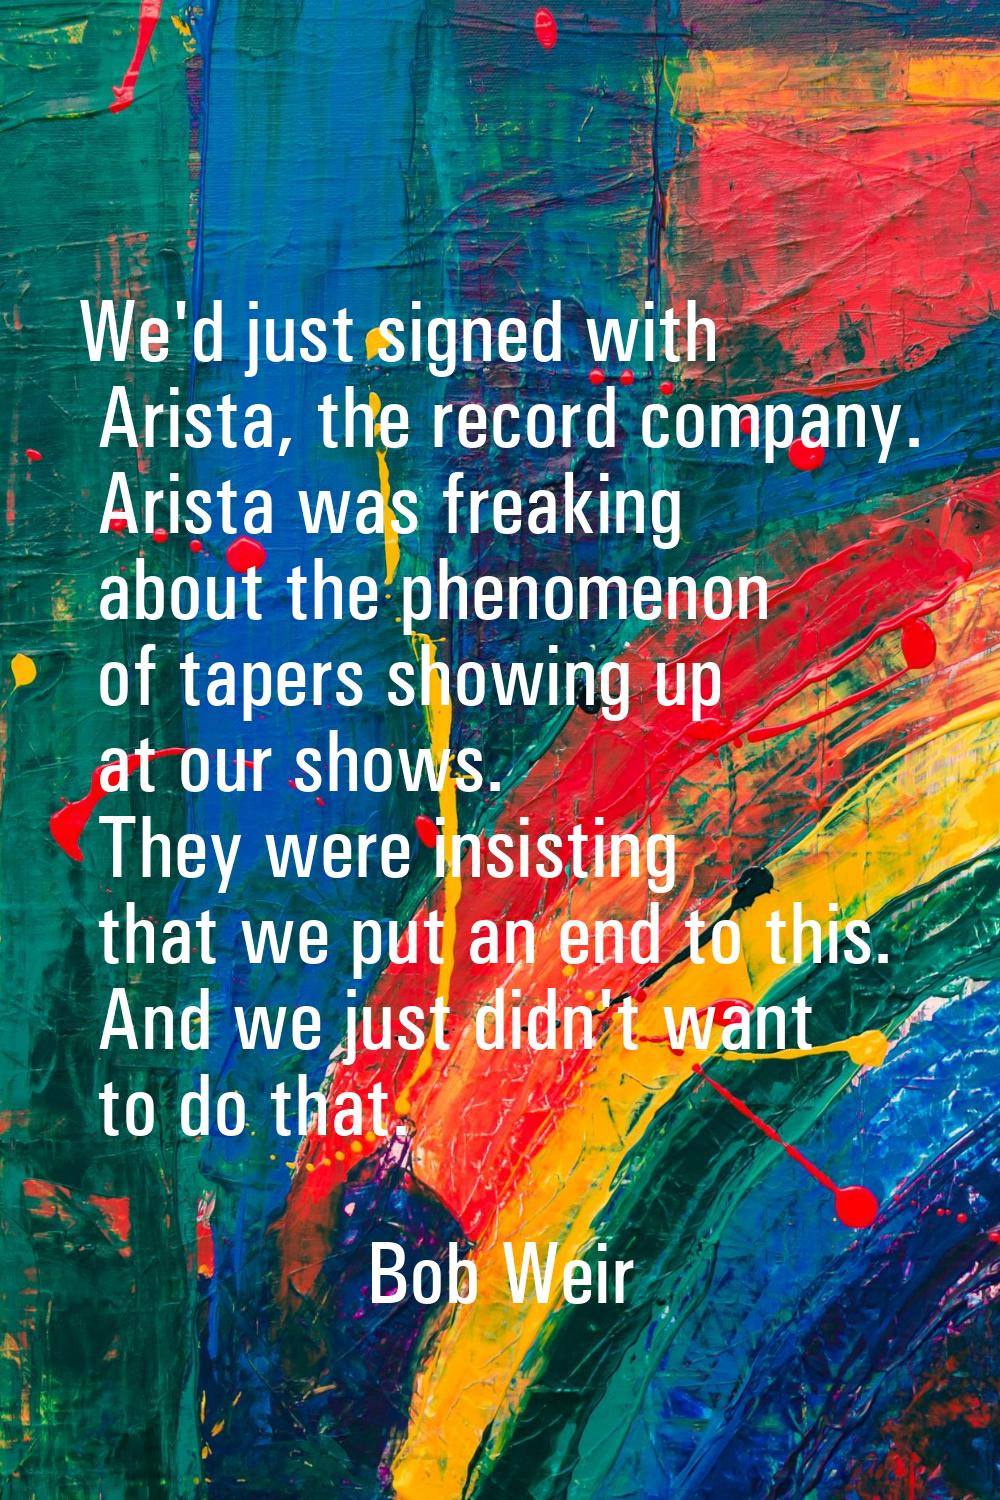 We'd just signed with Arista, the record company. Arista was freaking about the phenomenon of taper